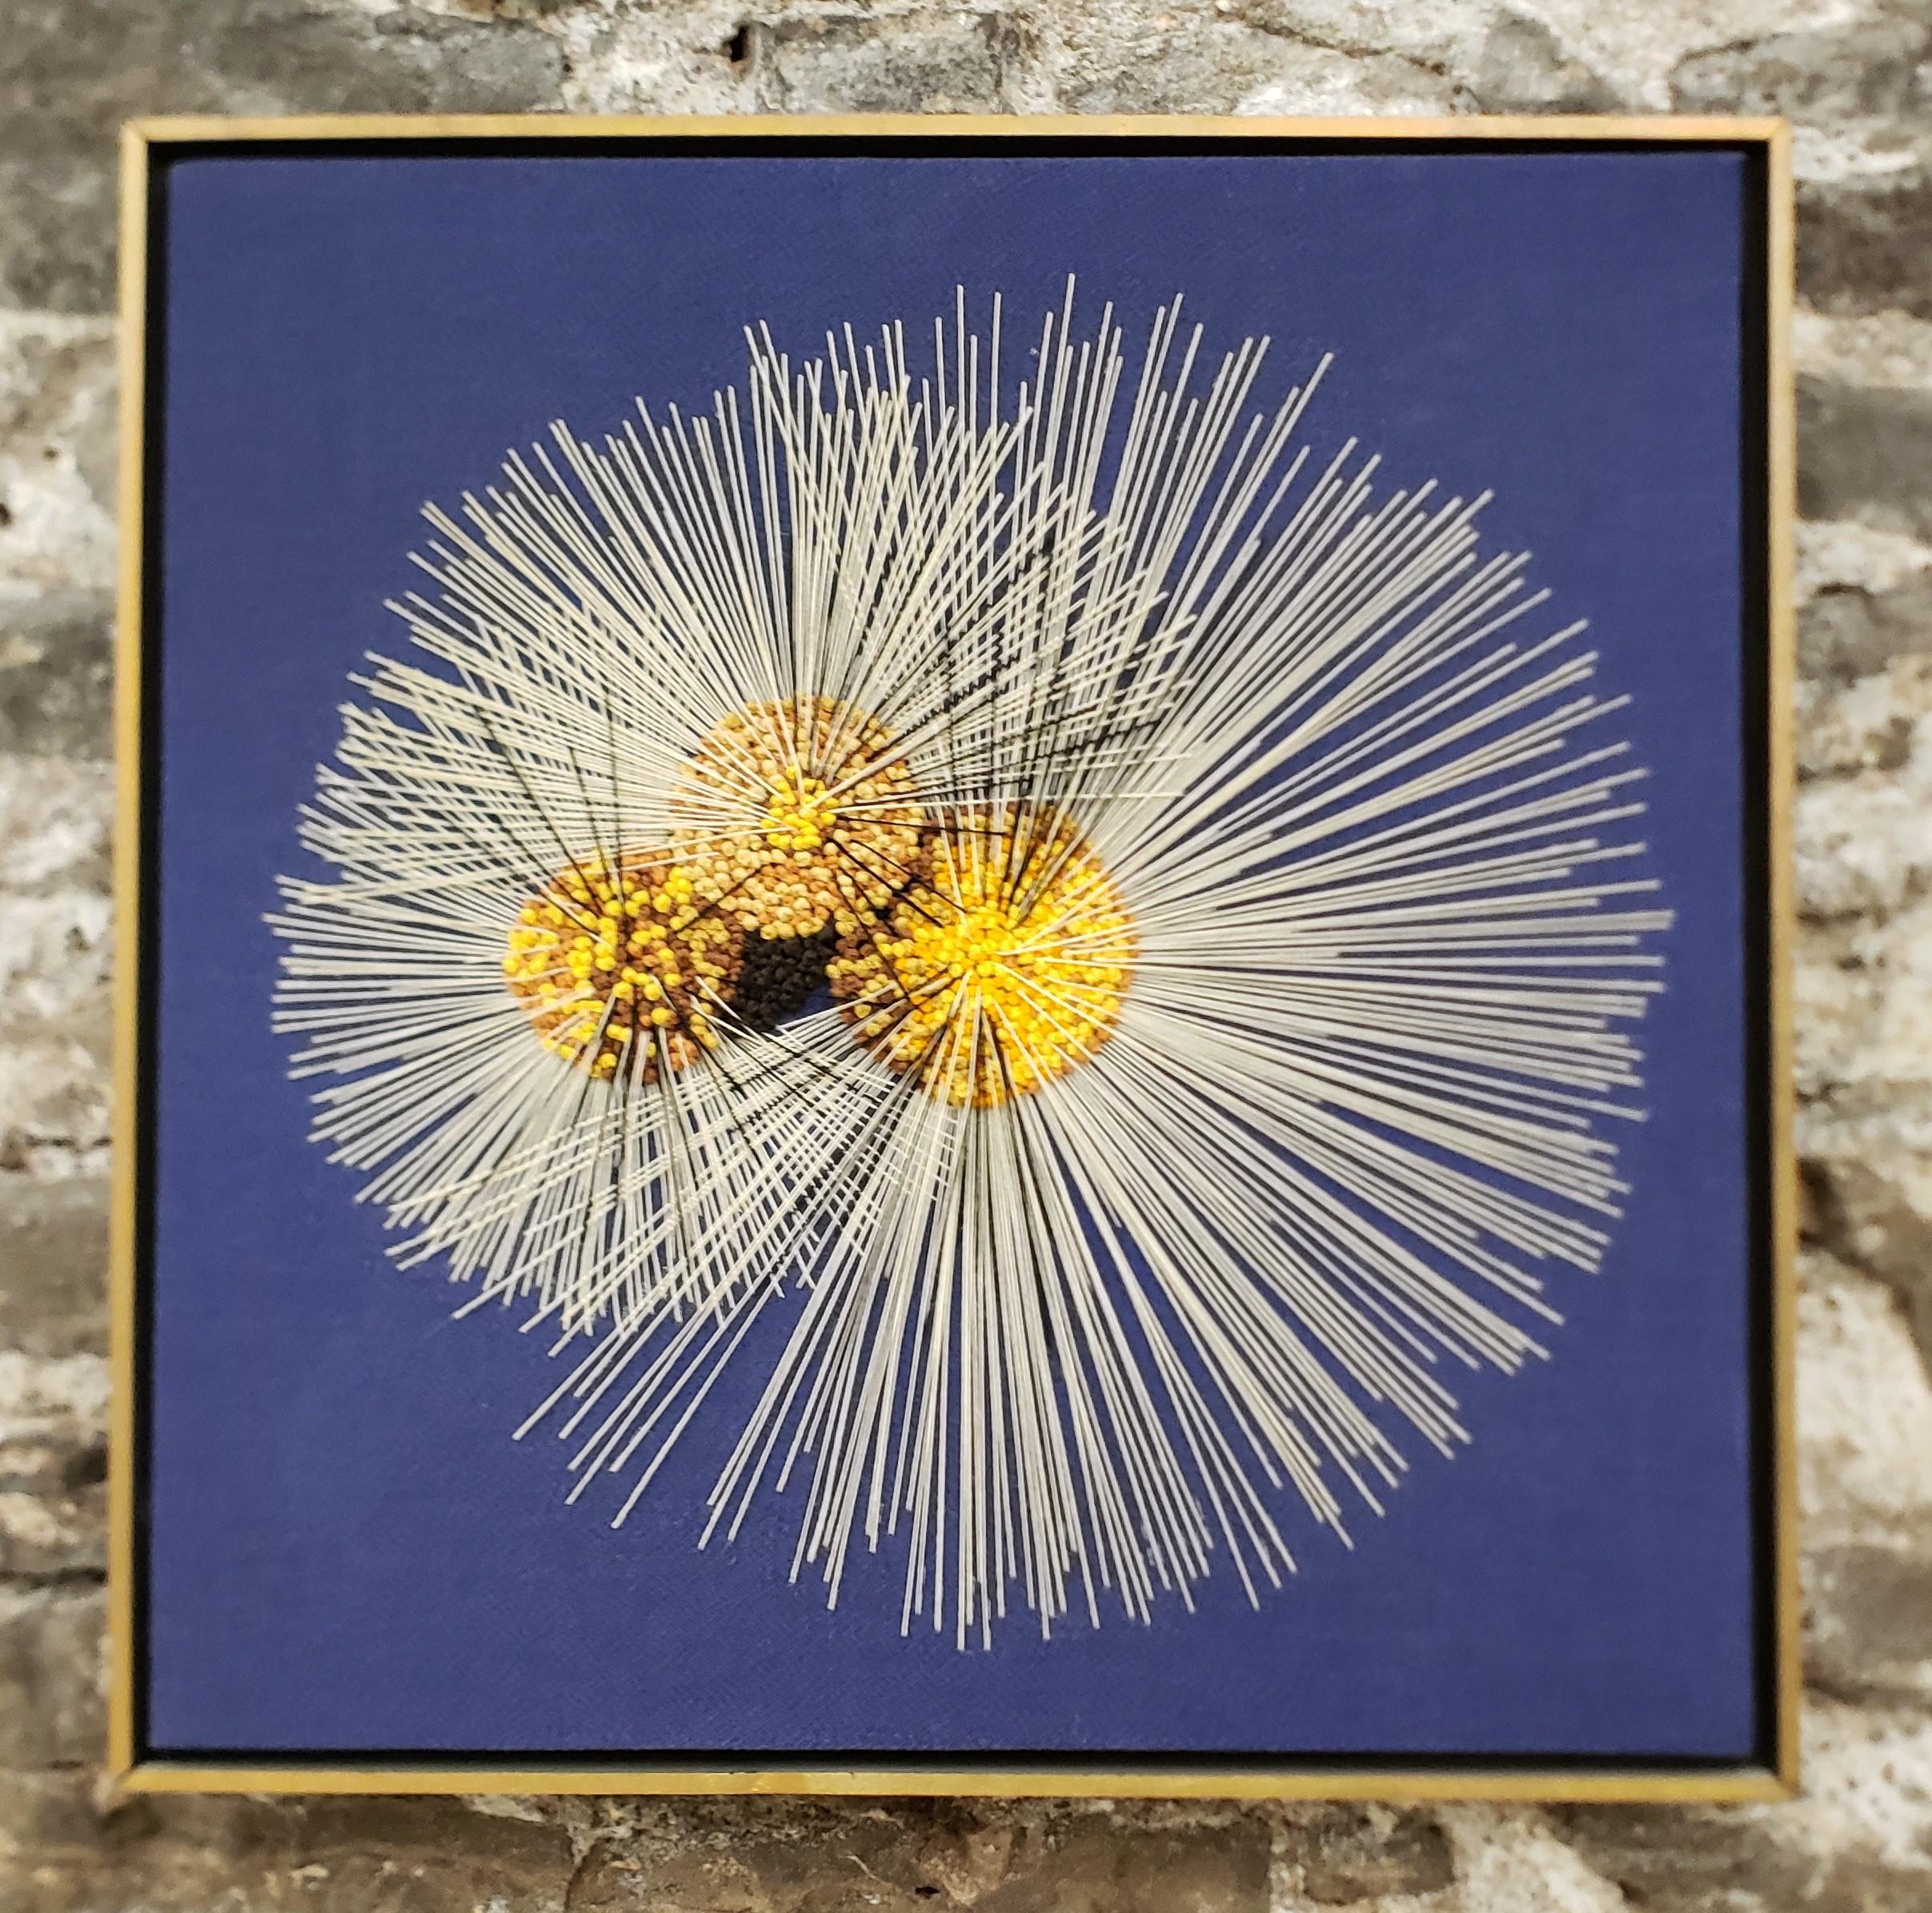 This artisan made framed wall sculpture is unsigned, but presumed to have originated from Canada and date to approximately 1970 and done in a Mid-Century Modern style. The sculpture is done with white string and a series of yellow wood on blue